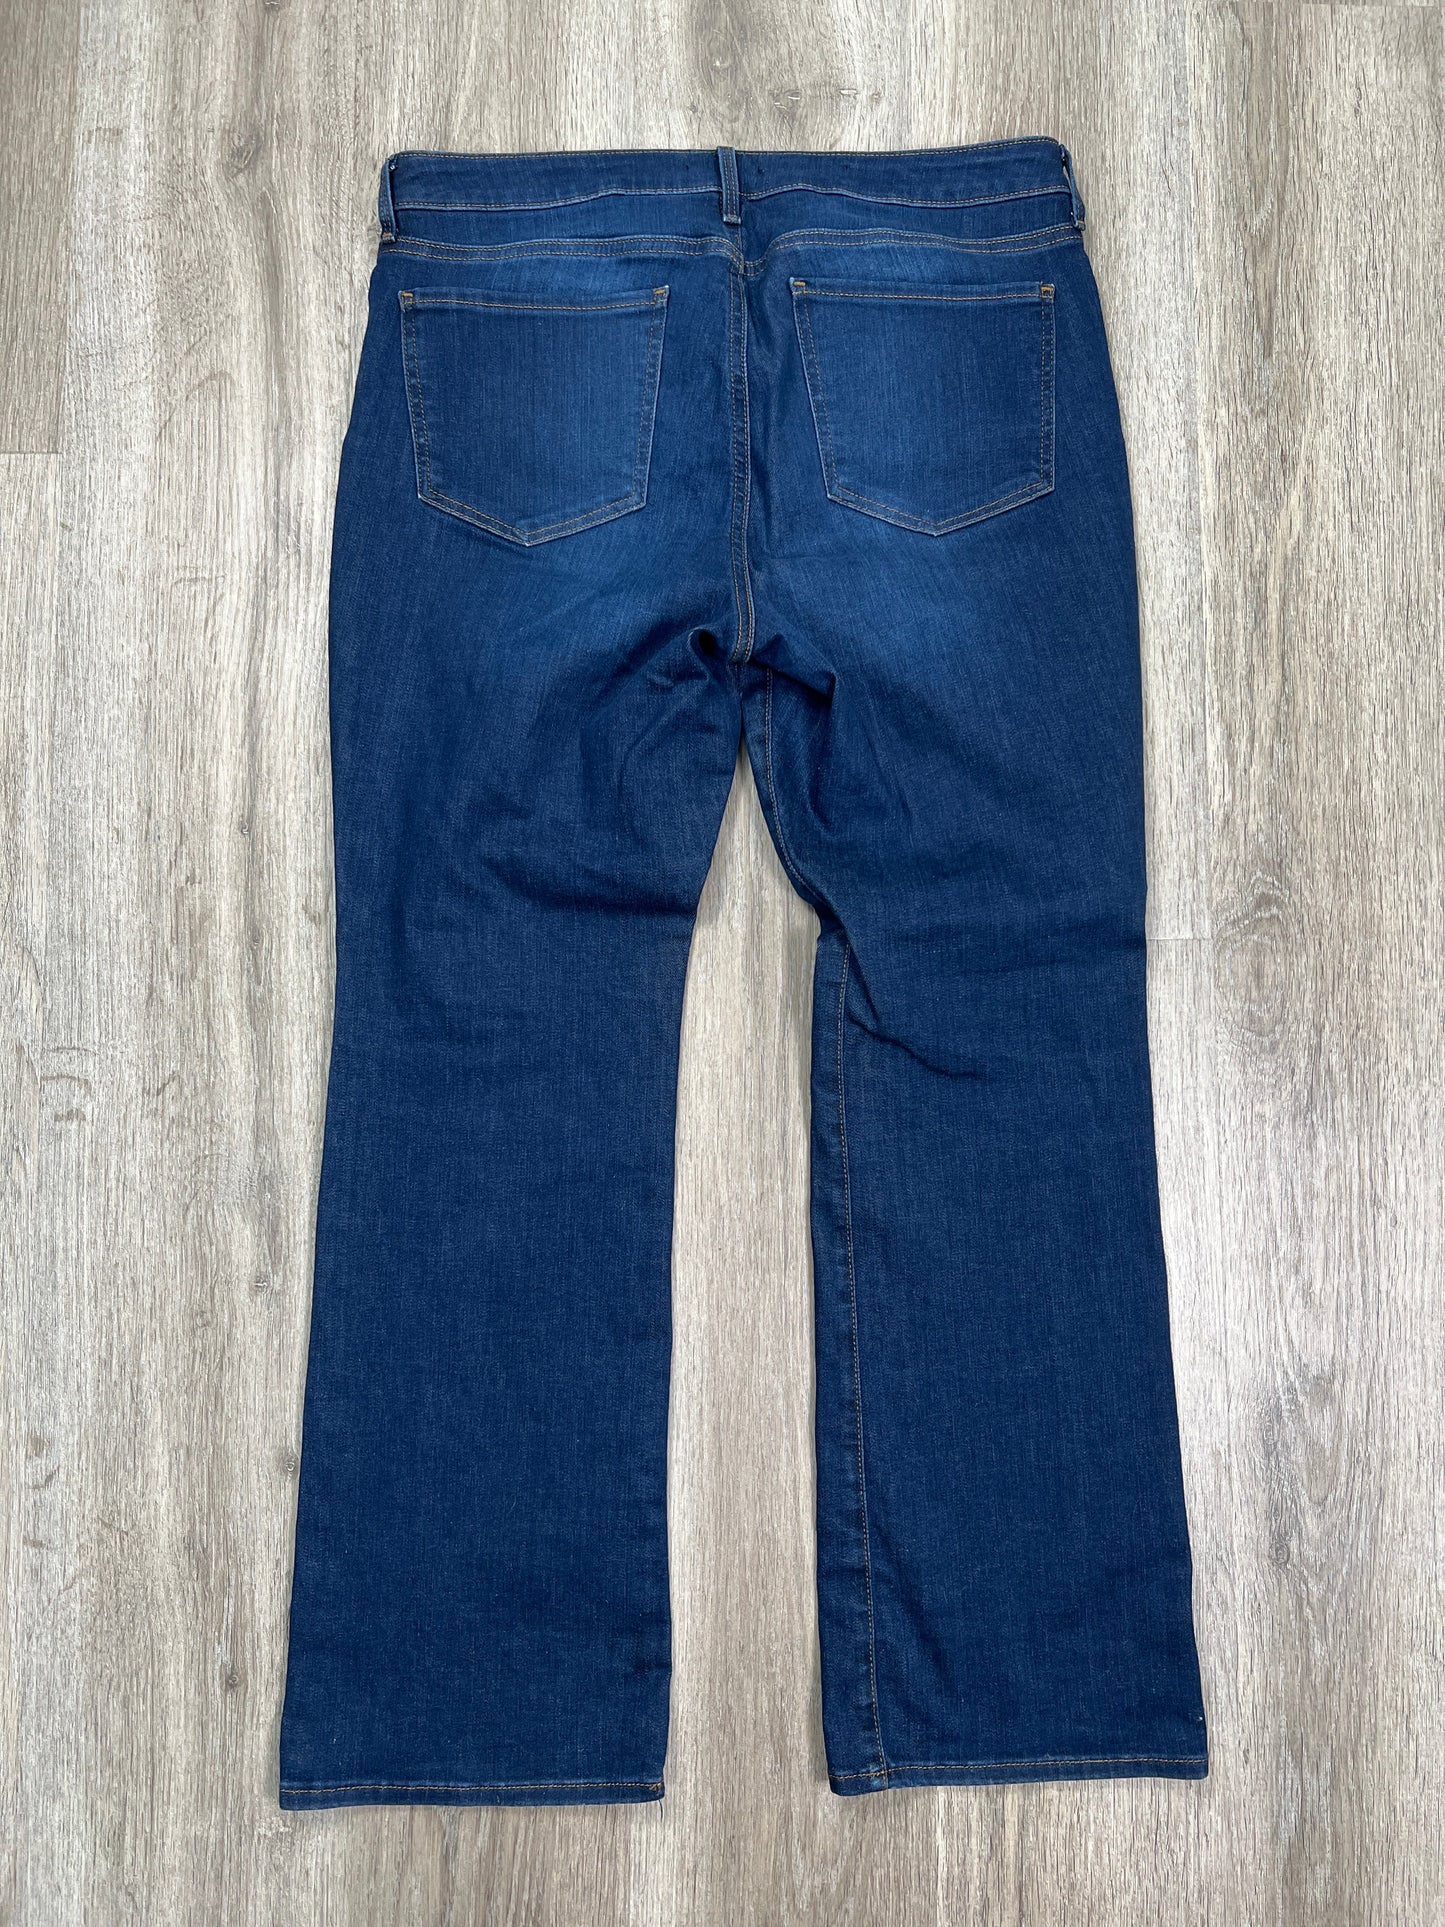 Jeans Boot Cut By Not Your Daughters Jeans  Size: 12petite